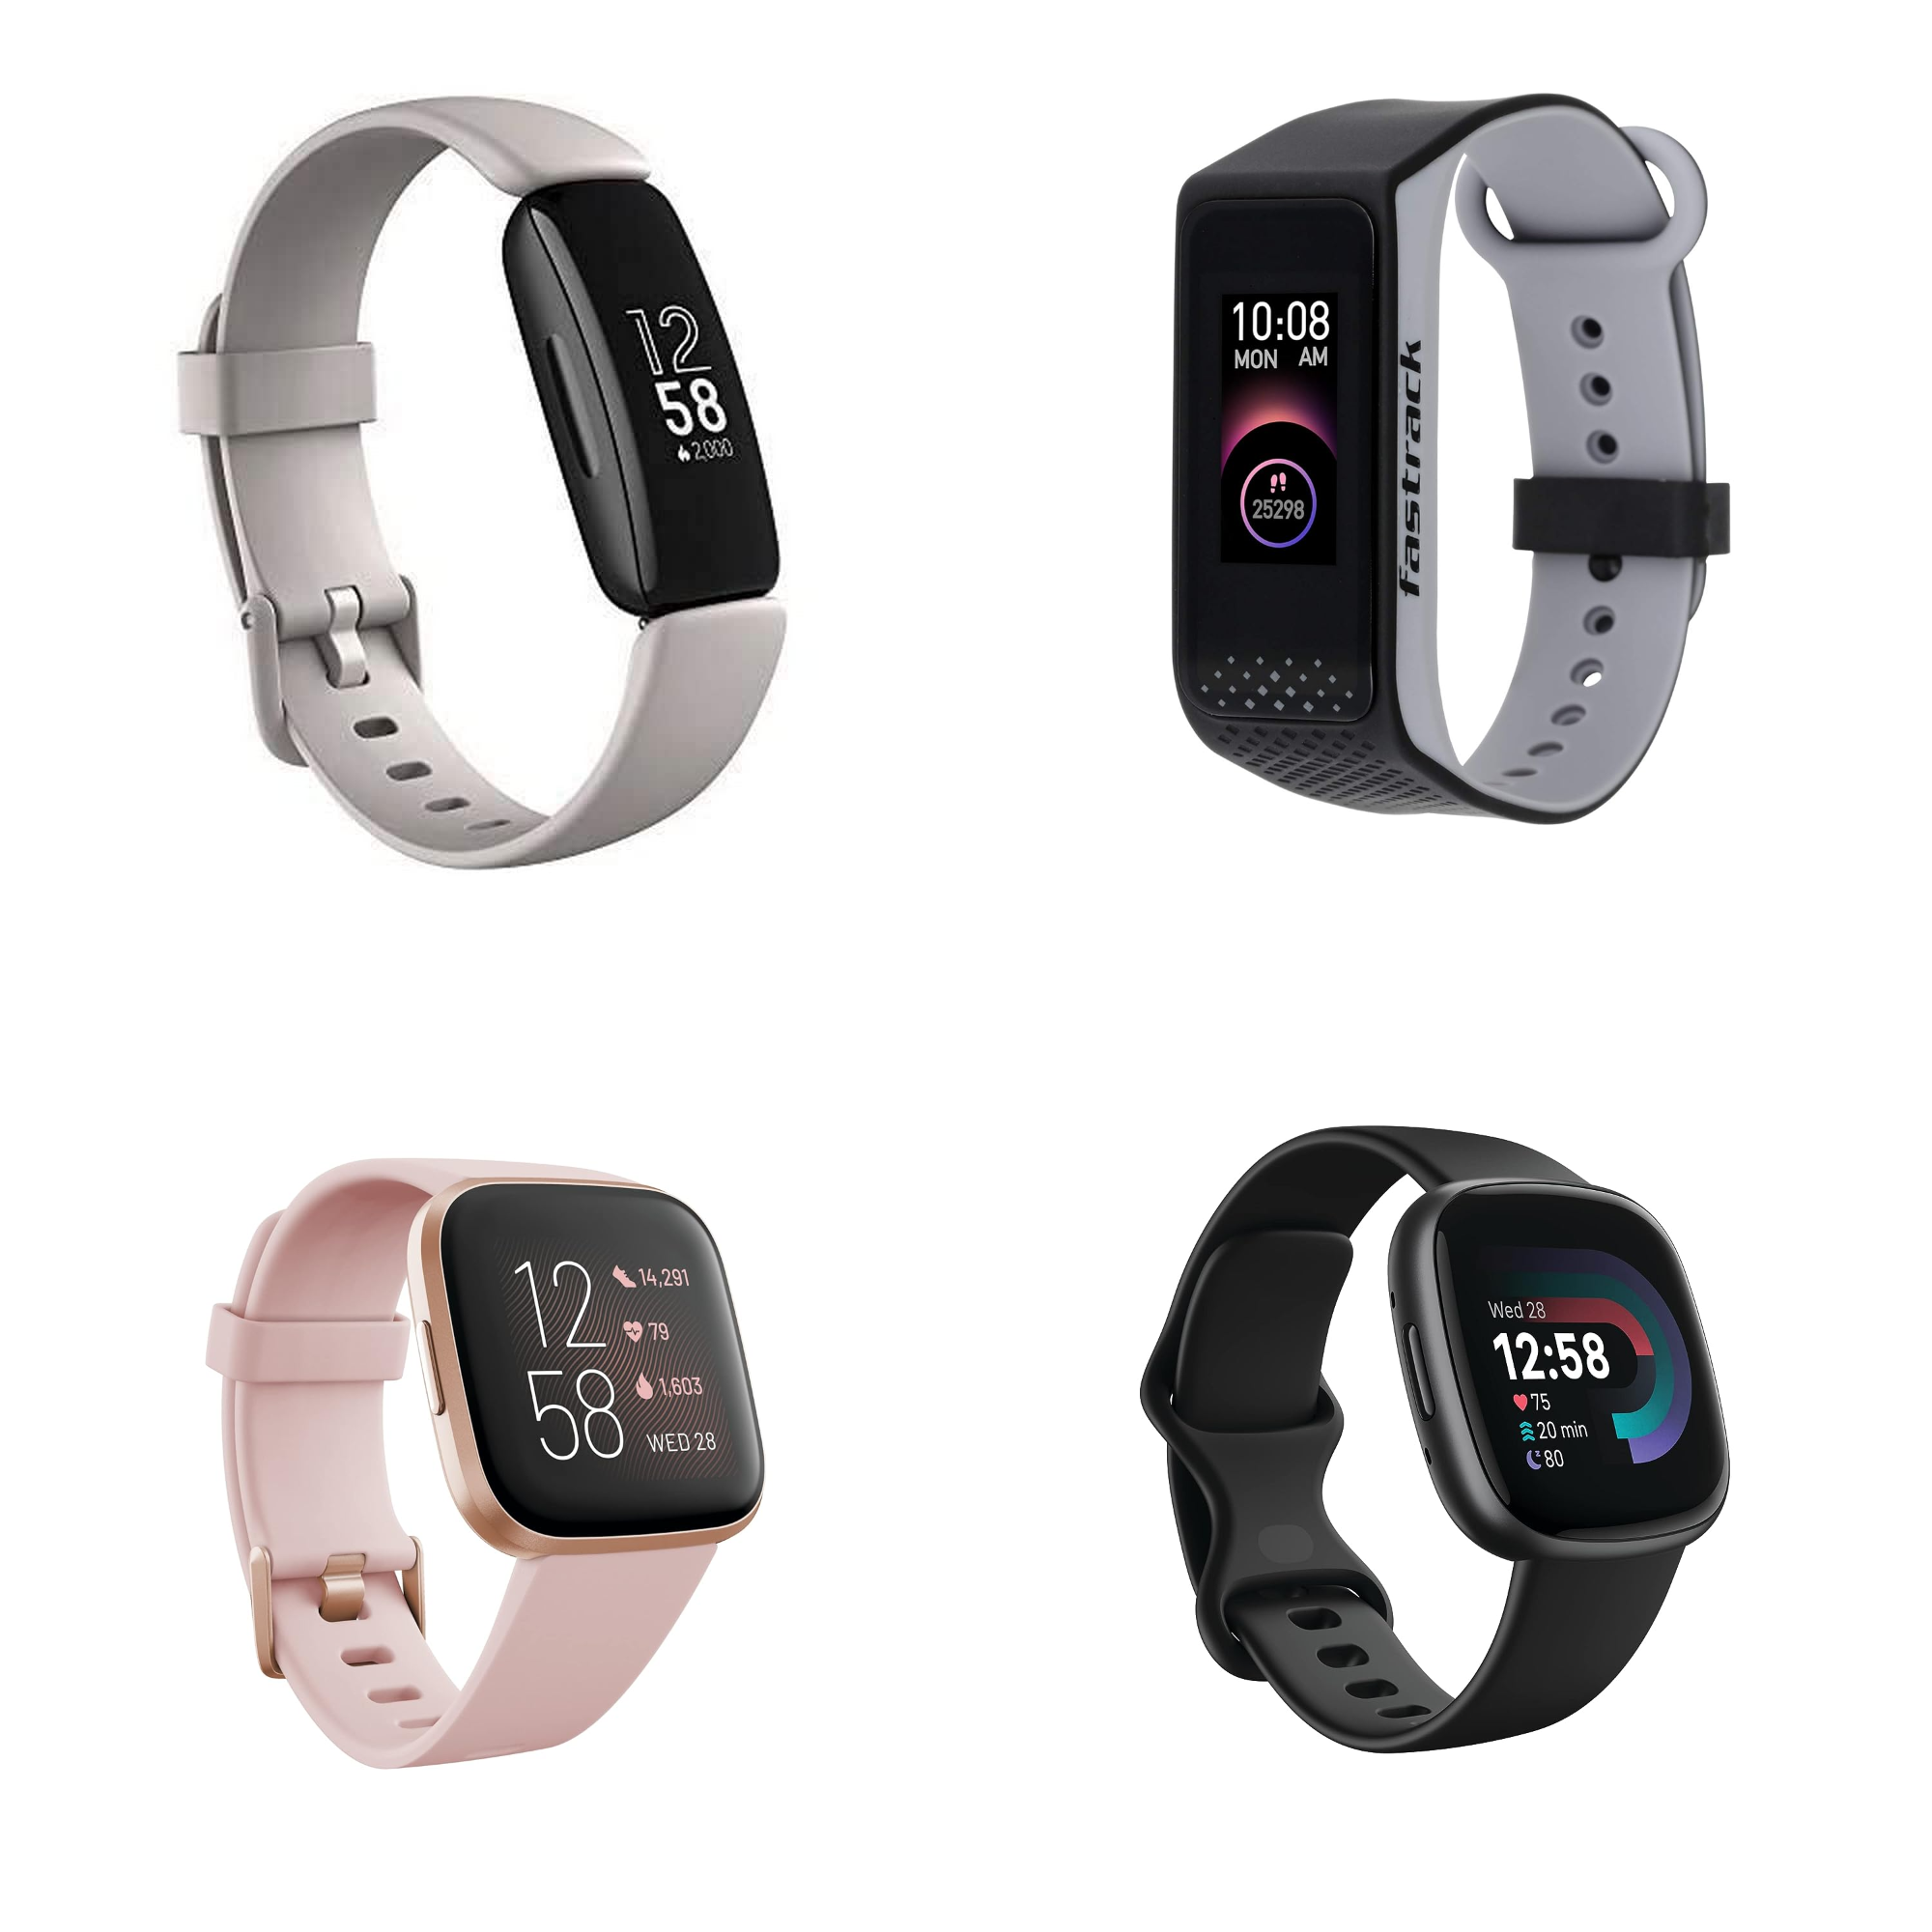 best activity trackers, best fitness trackers in india, Image Credit: Amazon